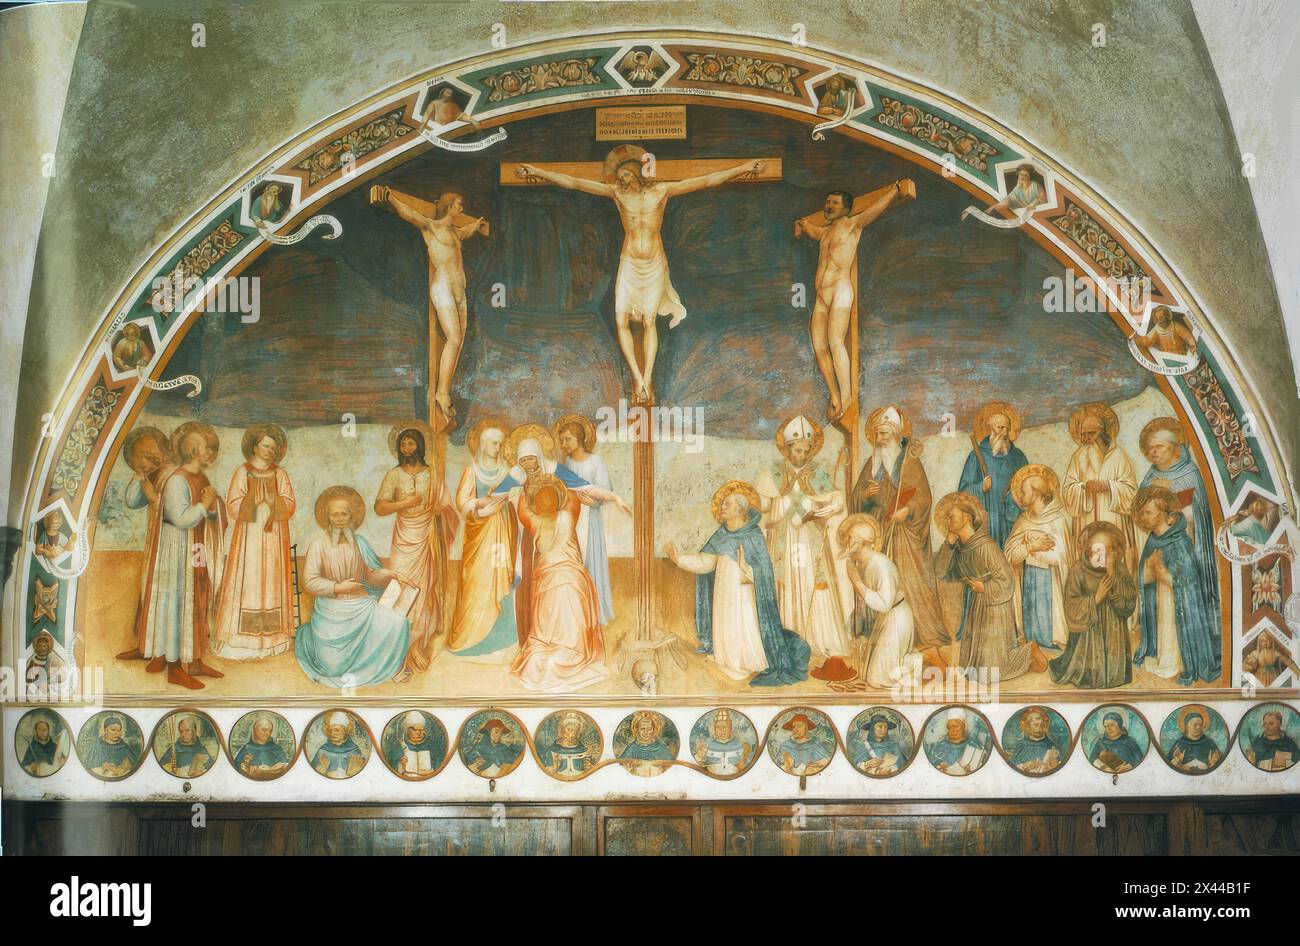 ANGELICO, Fra (b. ca. 1400, Vicchio nell Mugello, d. 1455, Roma)  Crucifixion and Saints 1441-42 Fresco, 550 x 950 cm Convento di San Marco, Florence  The giant fresco occupies the entire wall opposite to the entrance of the Chapter Room. The saints depicted are, from the left: Cosmas and Damian, Lawrence, Mark the Evangelist, John the Baptist, the Virgin and the pious women; to the right of the Cricifixion kneeling Dominic, Jerome, Francis, Bernard, John Gualberto and Peter the Martyr, standing Zanobi (or perhaps Ambrose), Augustin, Benedict, Romuald and Thomas of Aquino. Around the fresco, o Stock Photo